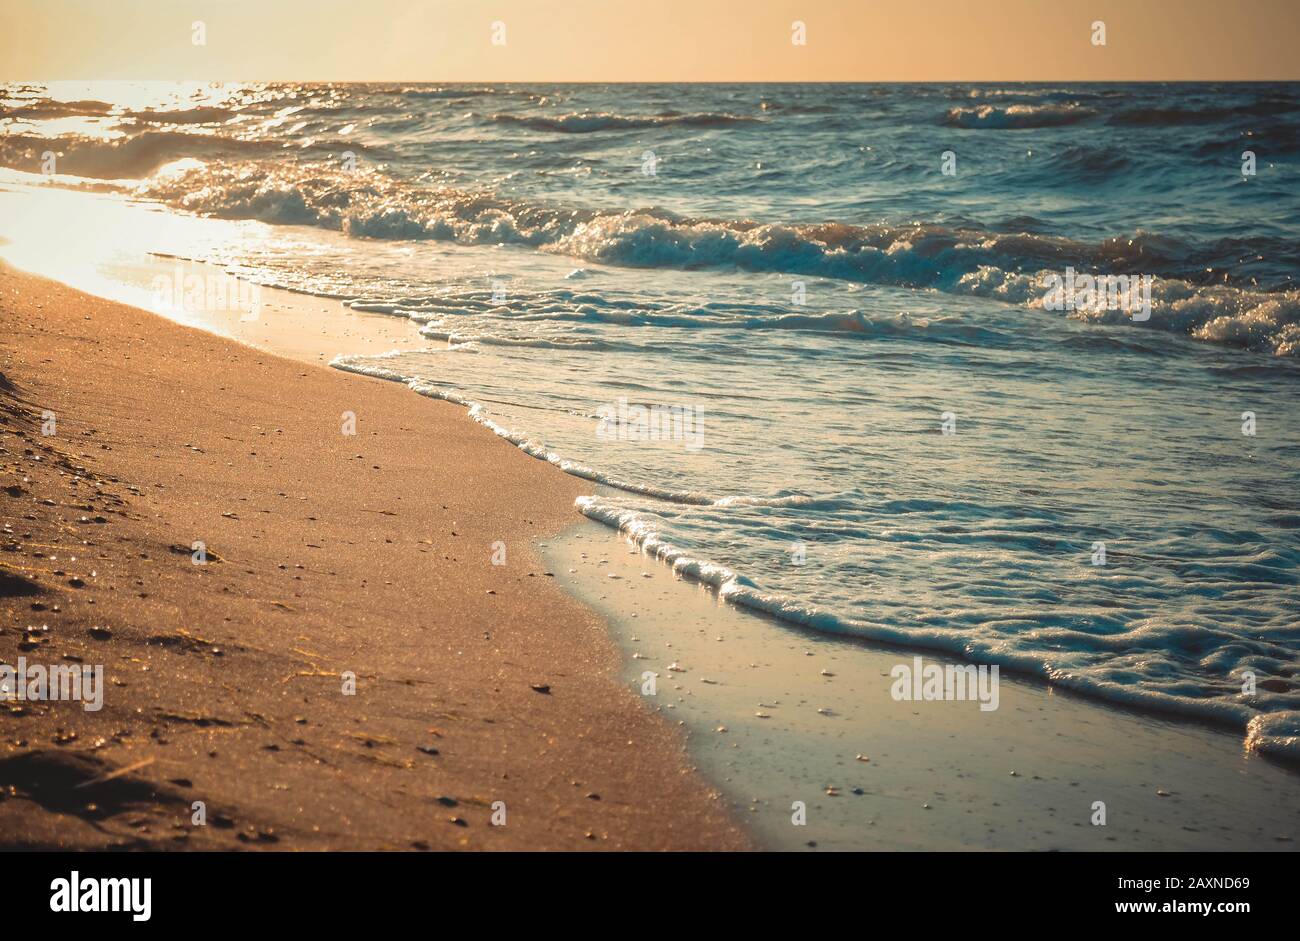 the sun is reflected in waves rolling on a sandy beach, close-up Stock Photo